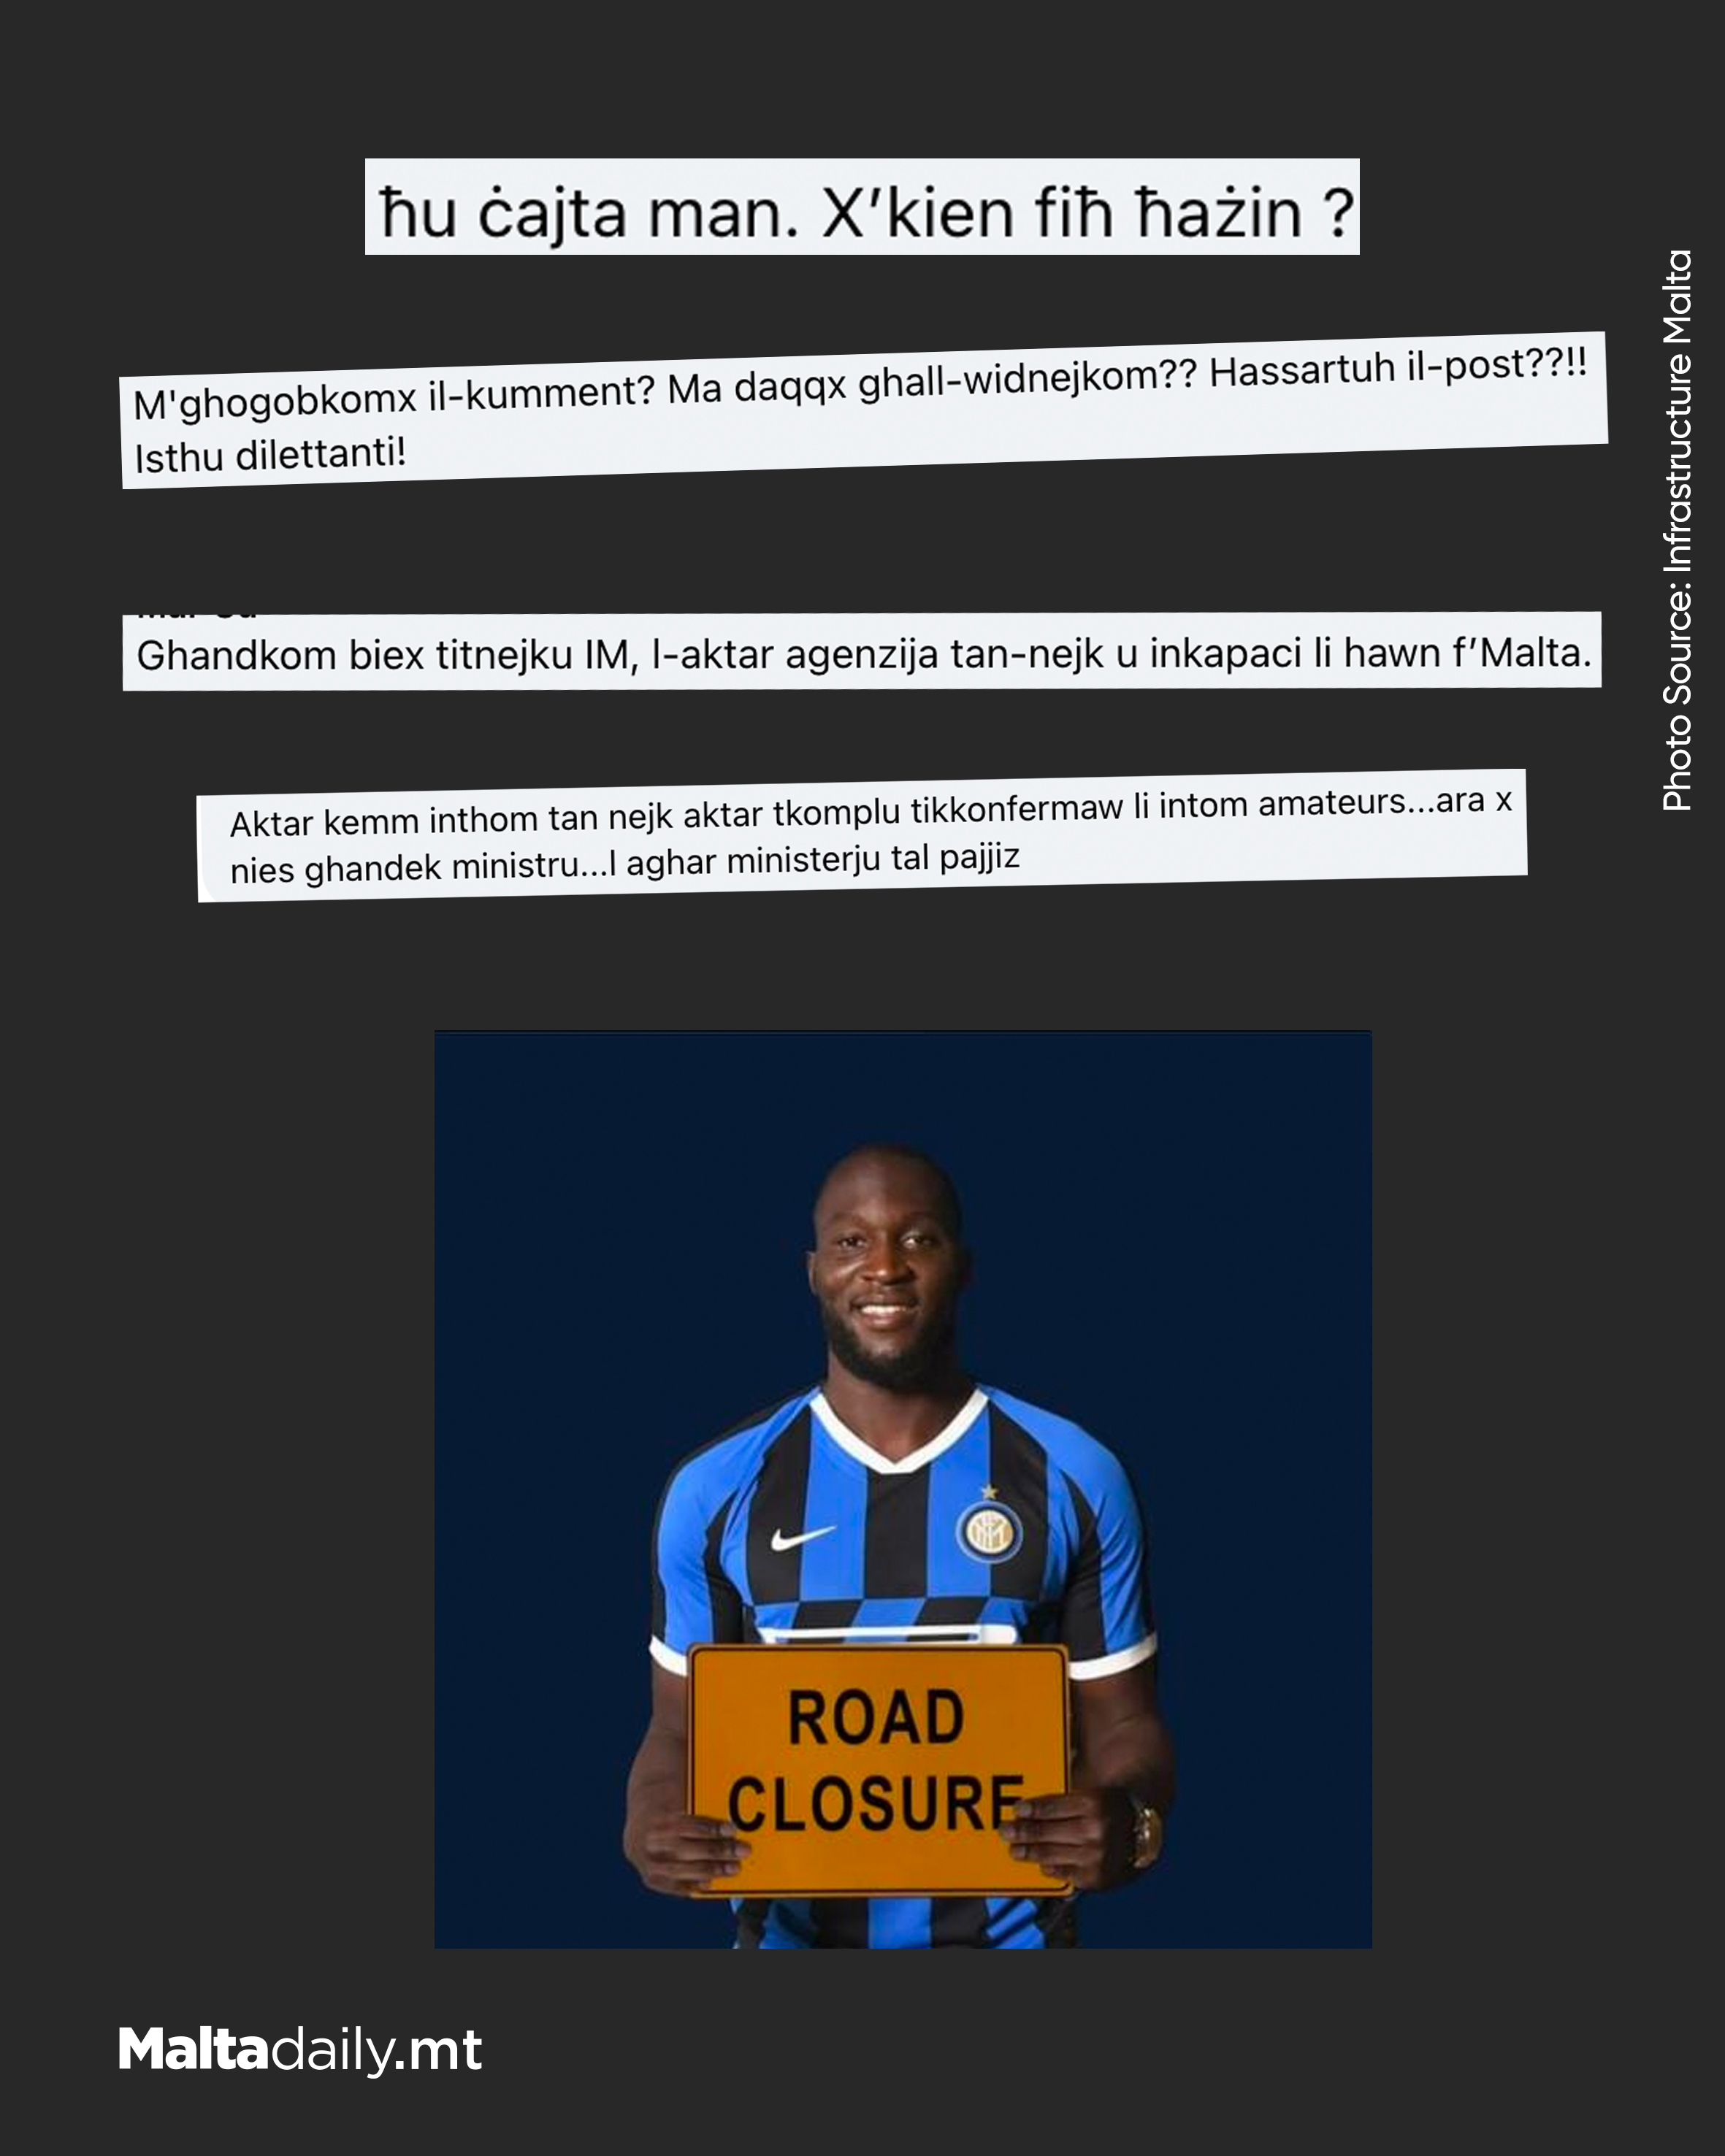 Infrastructure Malta used a photo of Lukaku to announce road closures today, following Inter's defeat against Man City in the UEFA Champions League Final last Saturday.